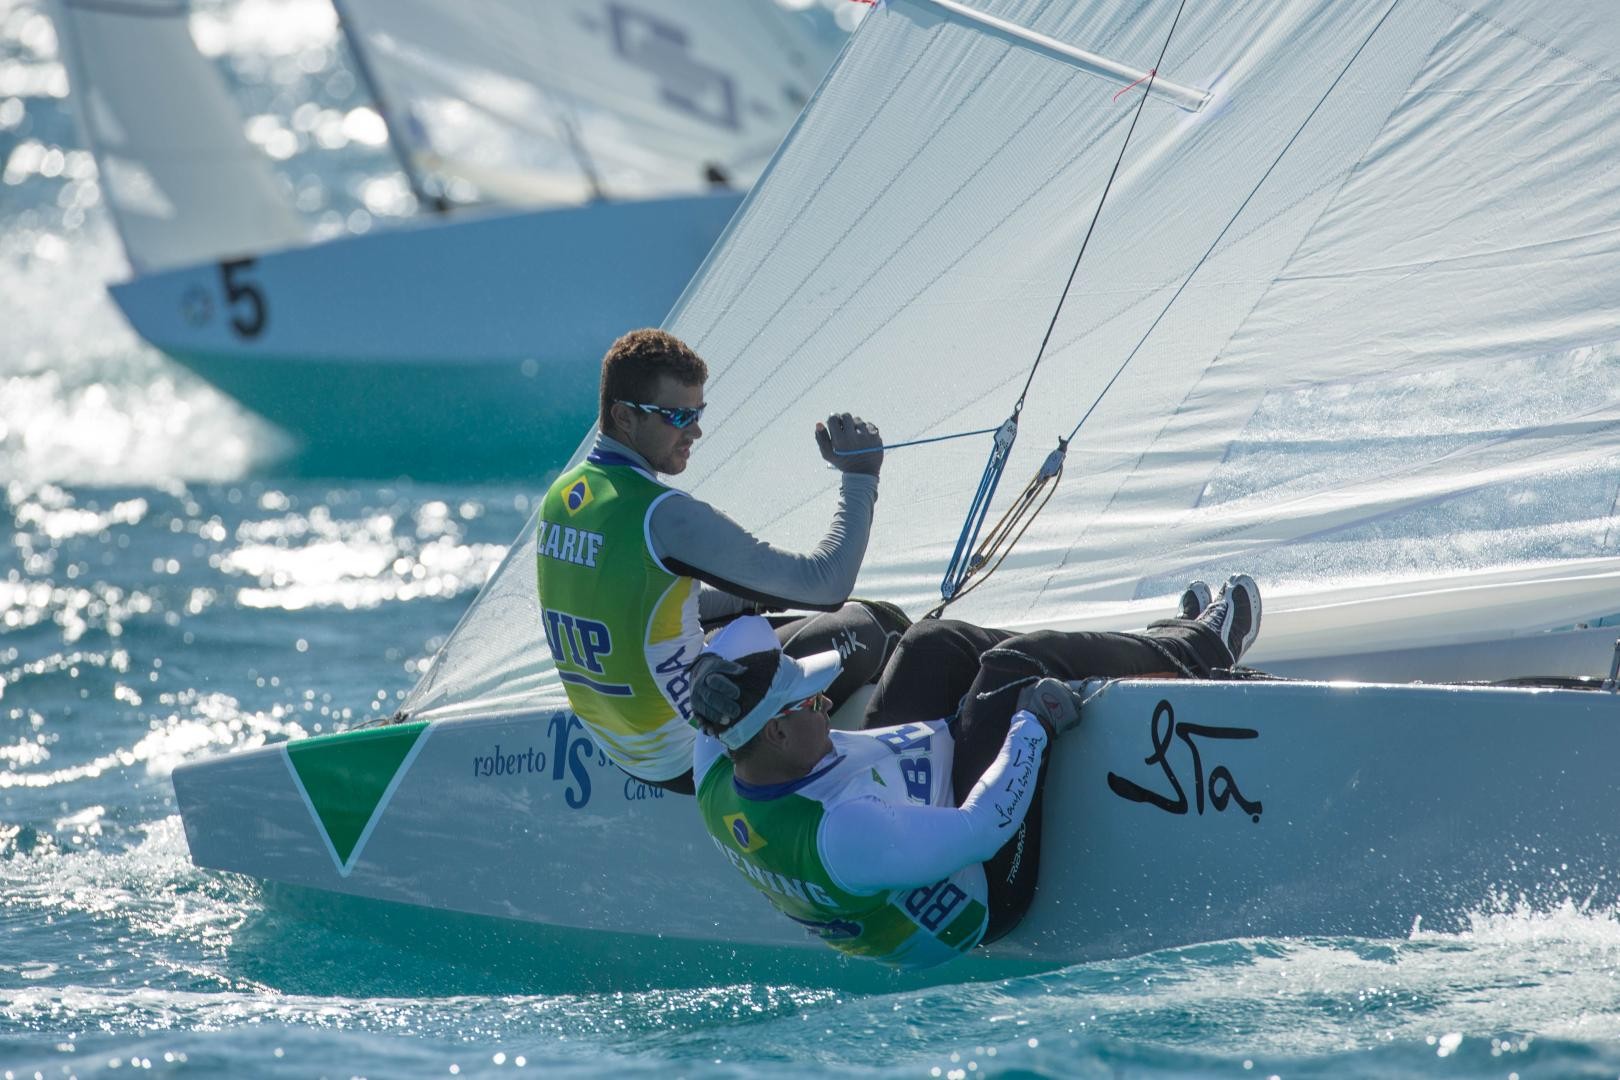 Jorge Zarif has worn a few yellow jerseys this year and stood on top of the podium in some Finn regattas, he is on the right track for an Olympic meda